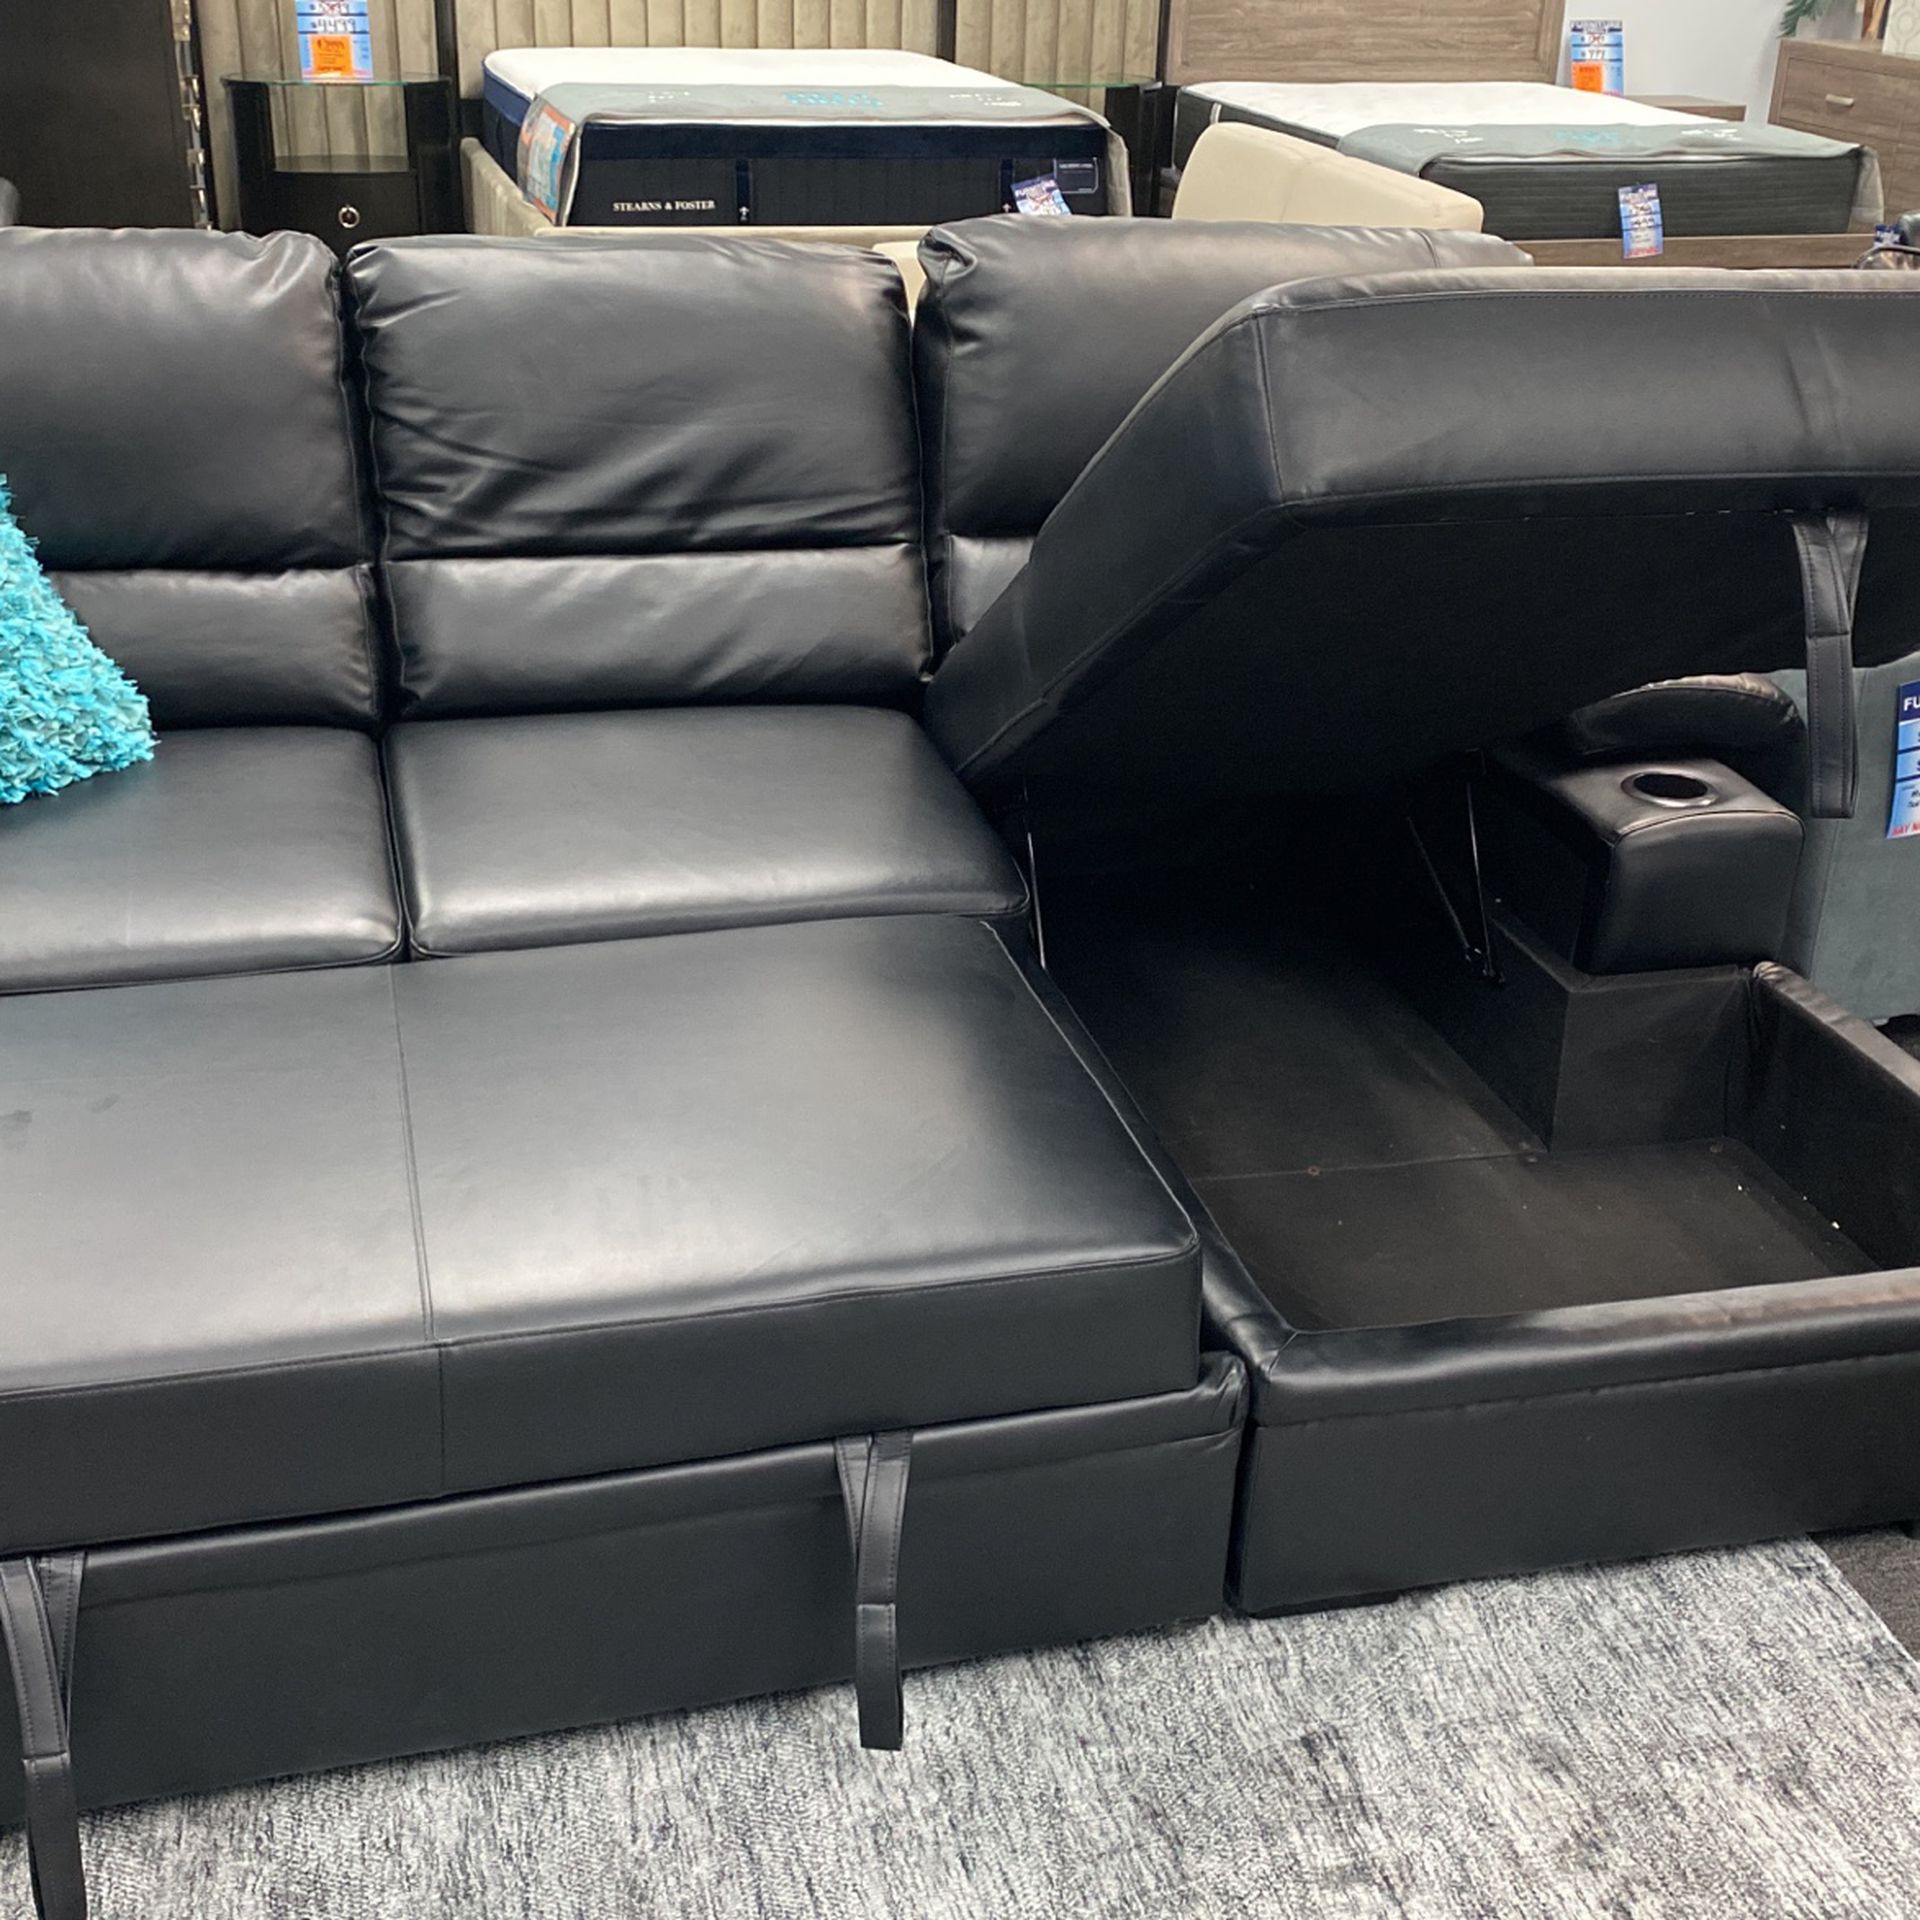 Sleeper Sectional With Cupholders And Storage!